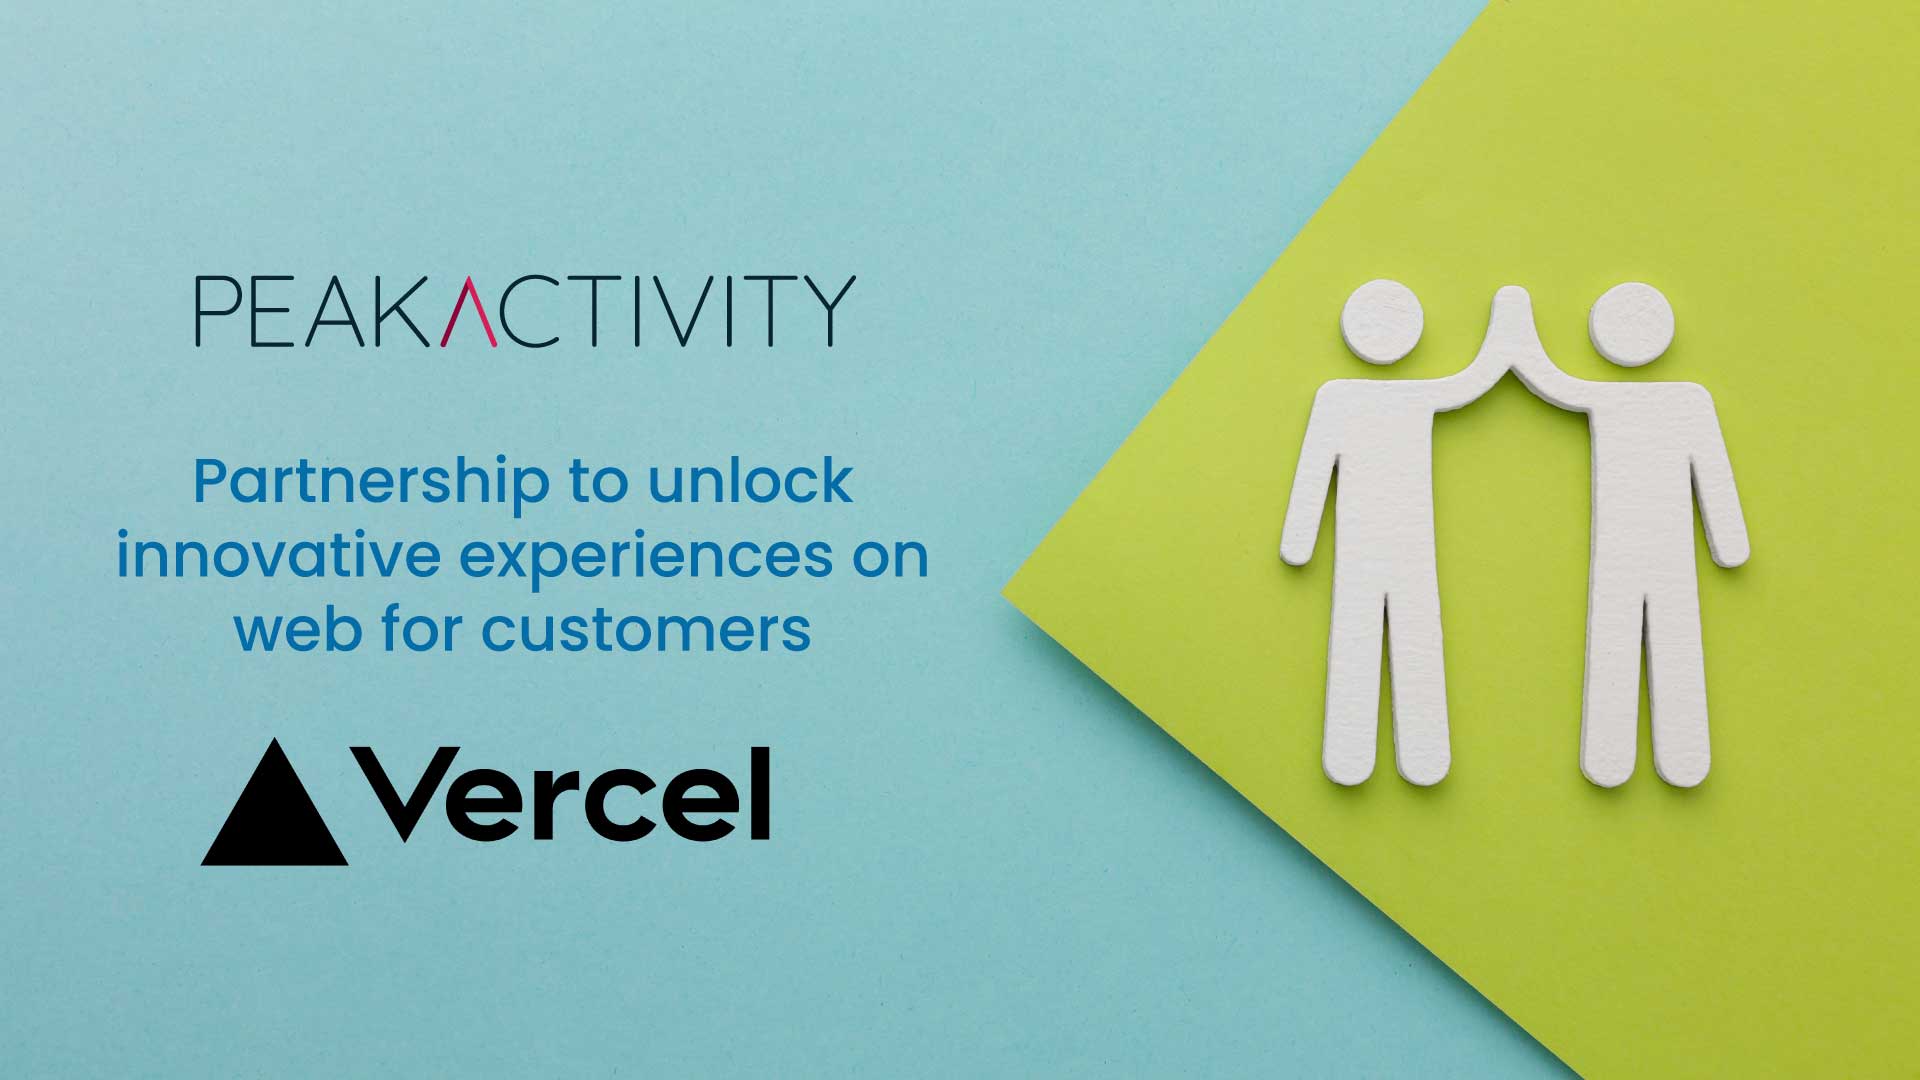 PeakActivity partners with Vercel to continue to unlock innovative experiences on the web for their customers